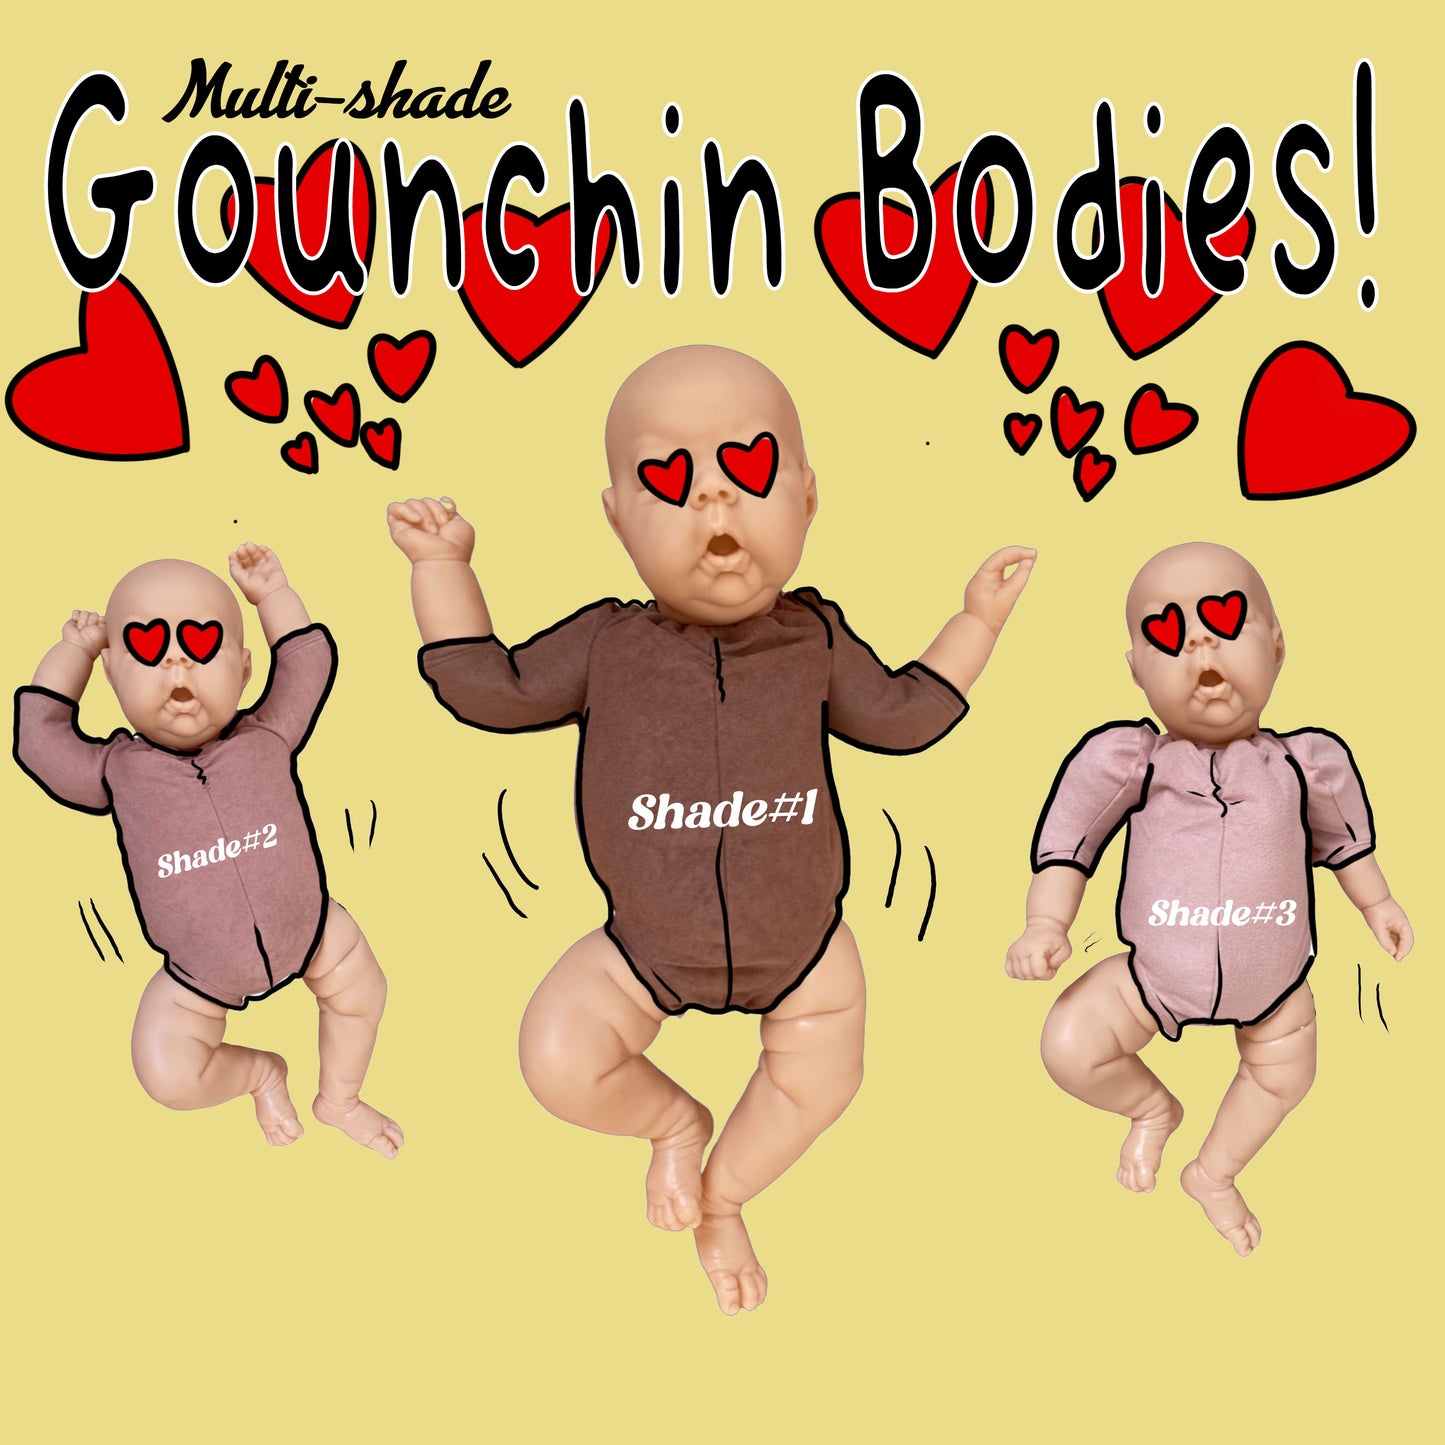 NEW! Gounchin Belly less Body! Different skin tones! 1/4 arms Full legs body!